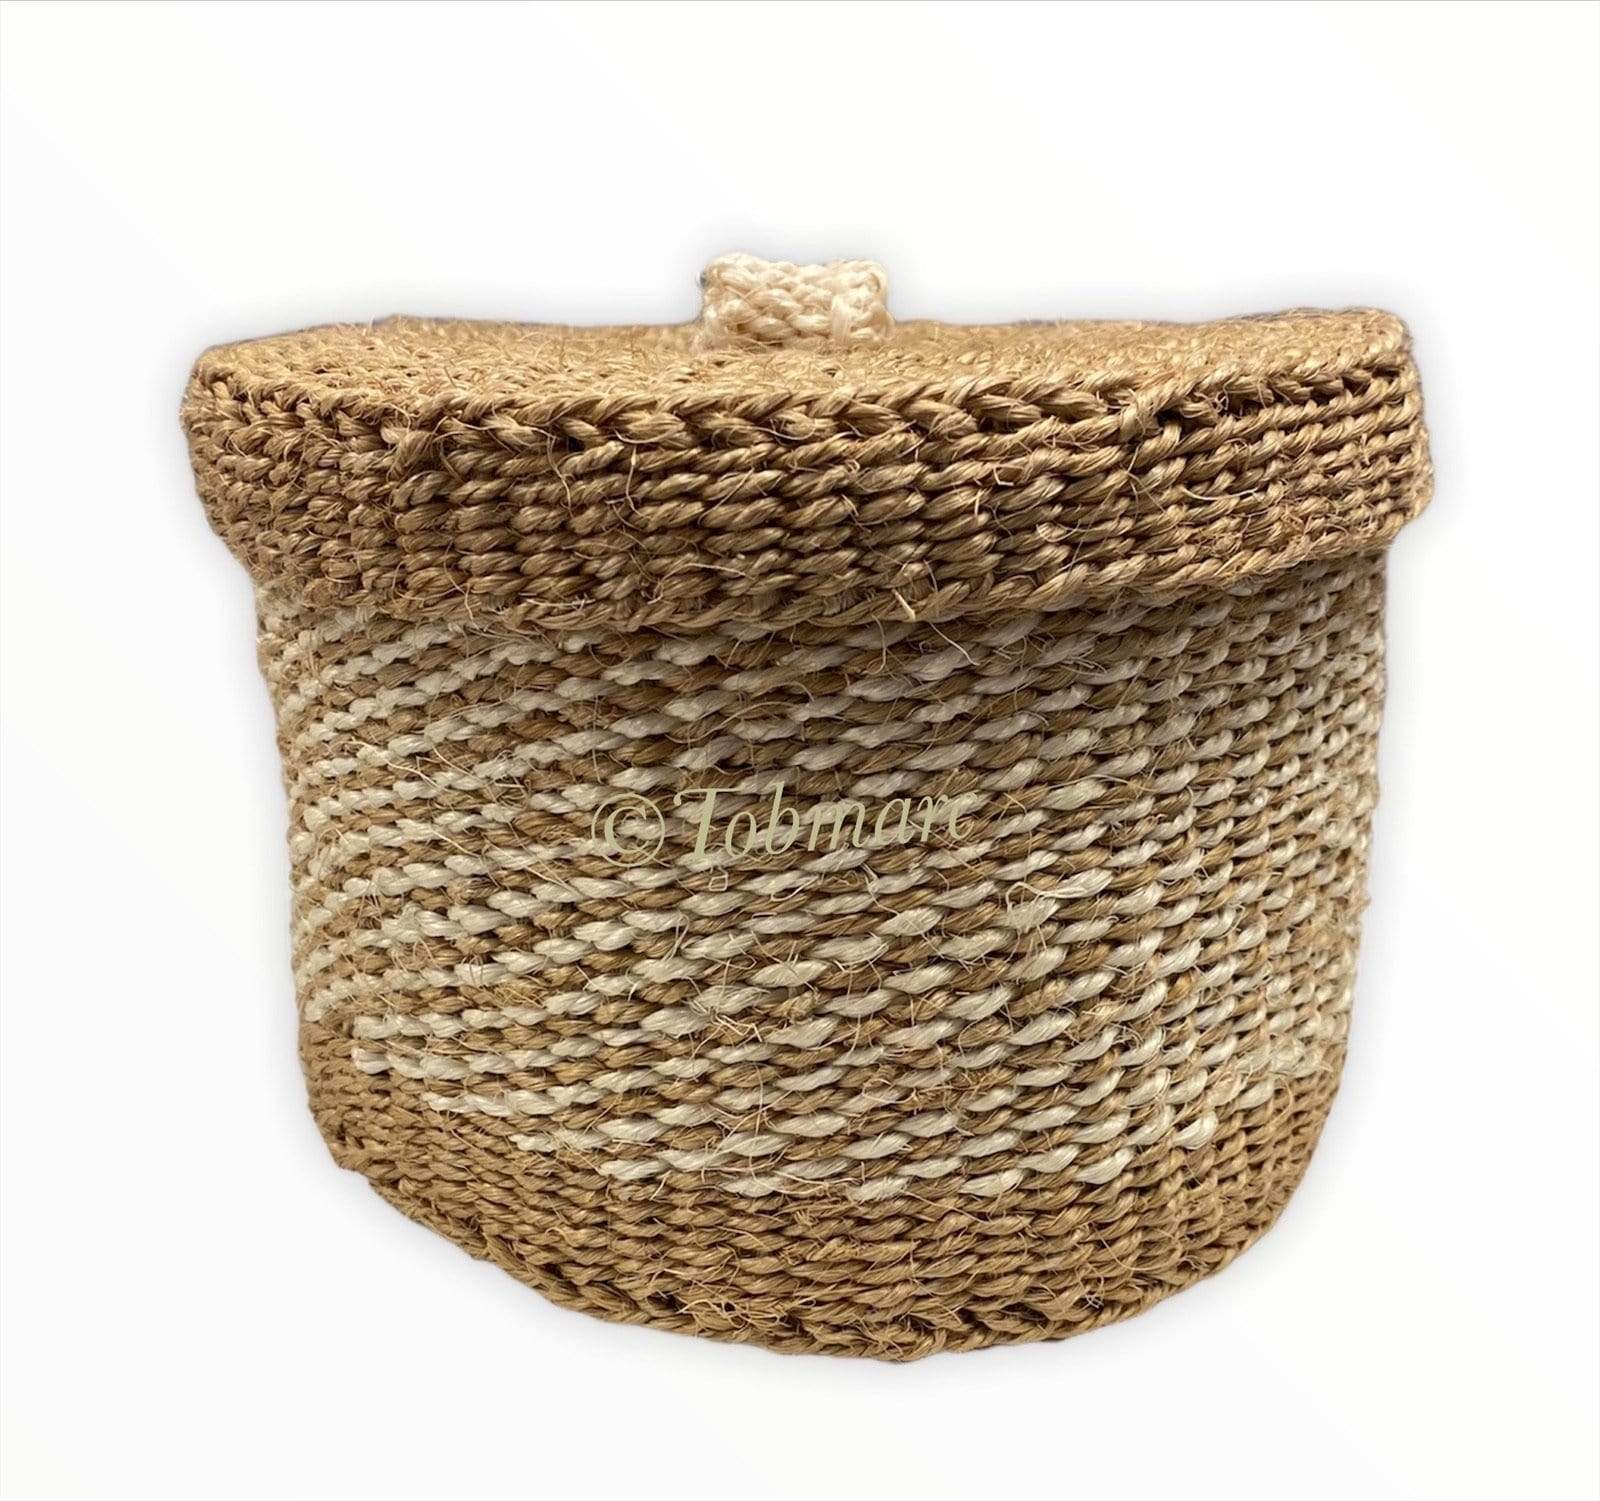 Tobmarc Home Decor & Gifts  Beige and White TWIN-Small Baskets with a Lid, basket storage, Handwoven Mini Basket